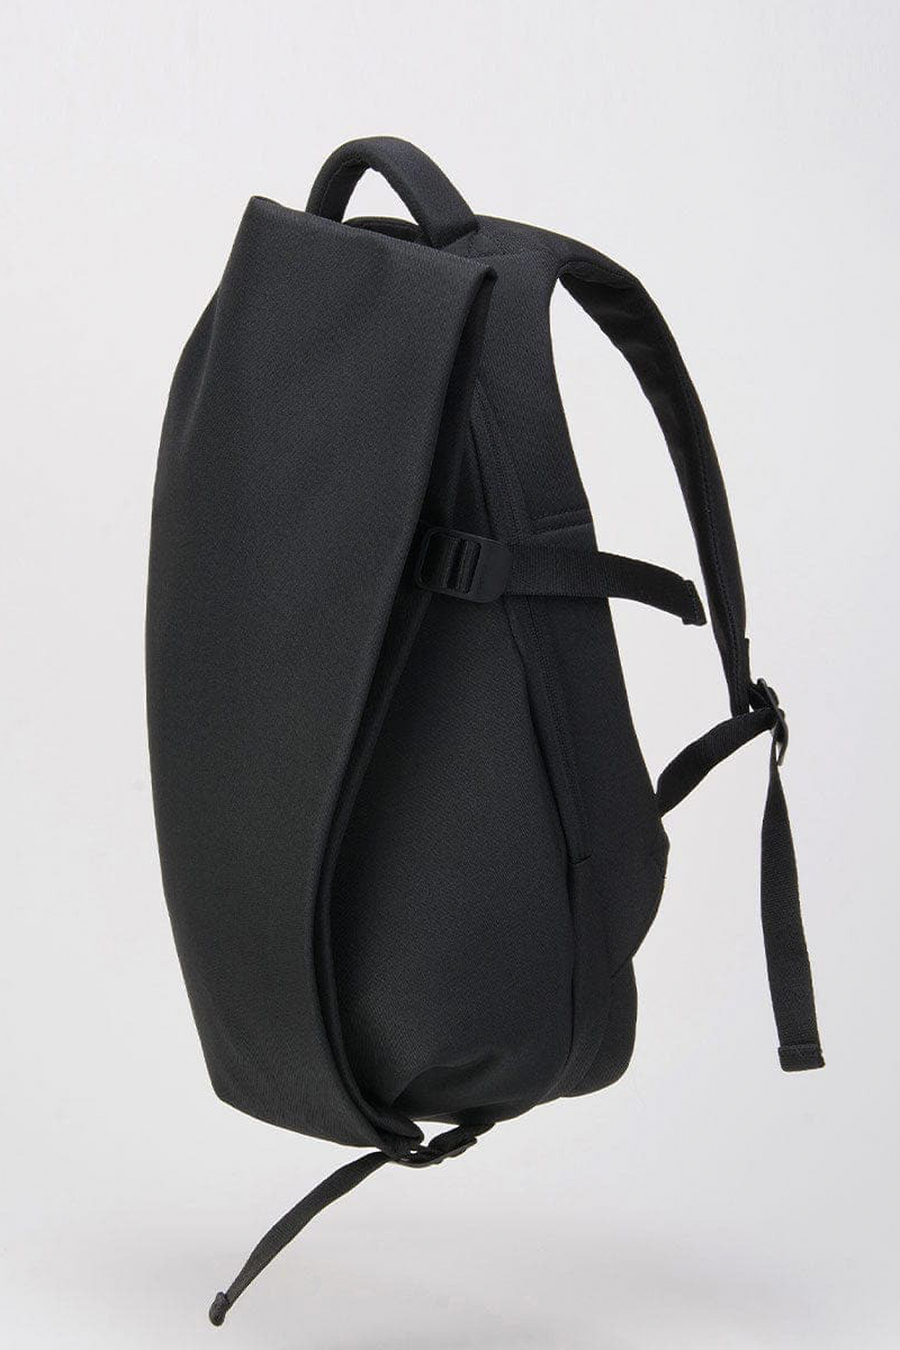 Buy the Cote & Ciel Isar Backpack Small EcoYarn in Black at Intro. Spend £50 for free UK delivery. Official stockists. We ship worldwide.